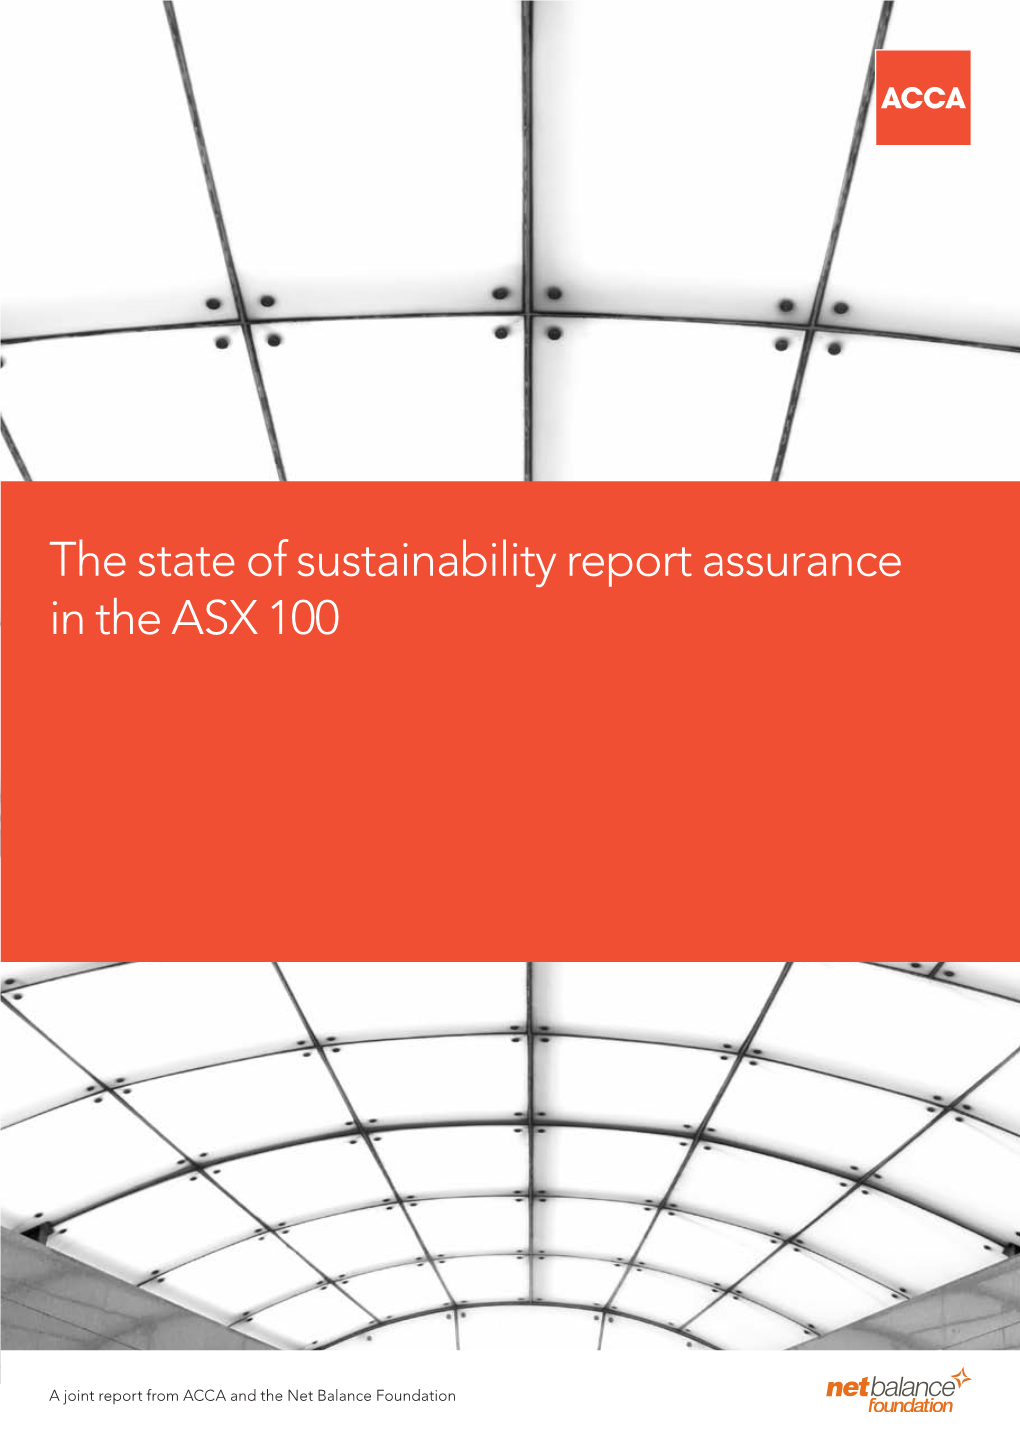 The State of Sustainability Report Assurance in the ASX 100